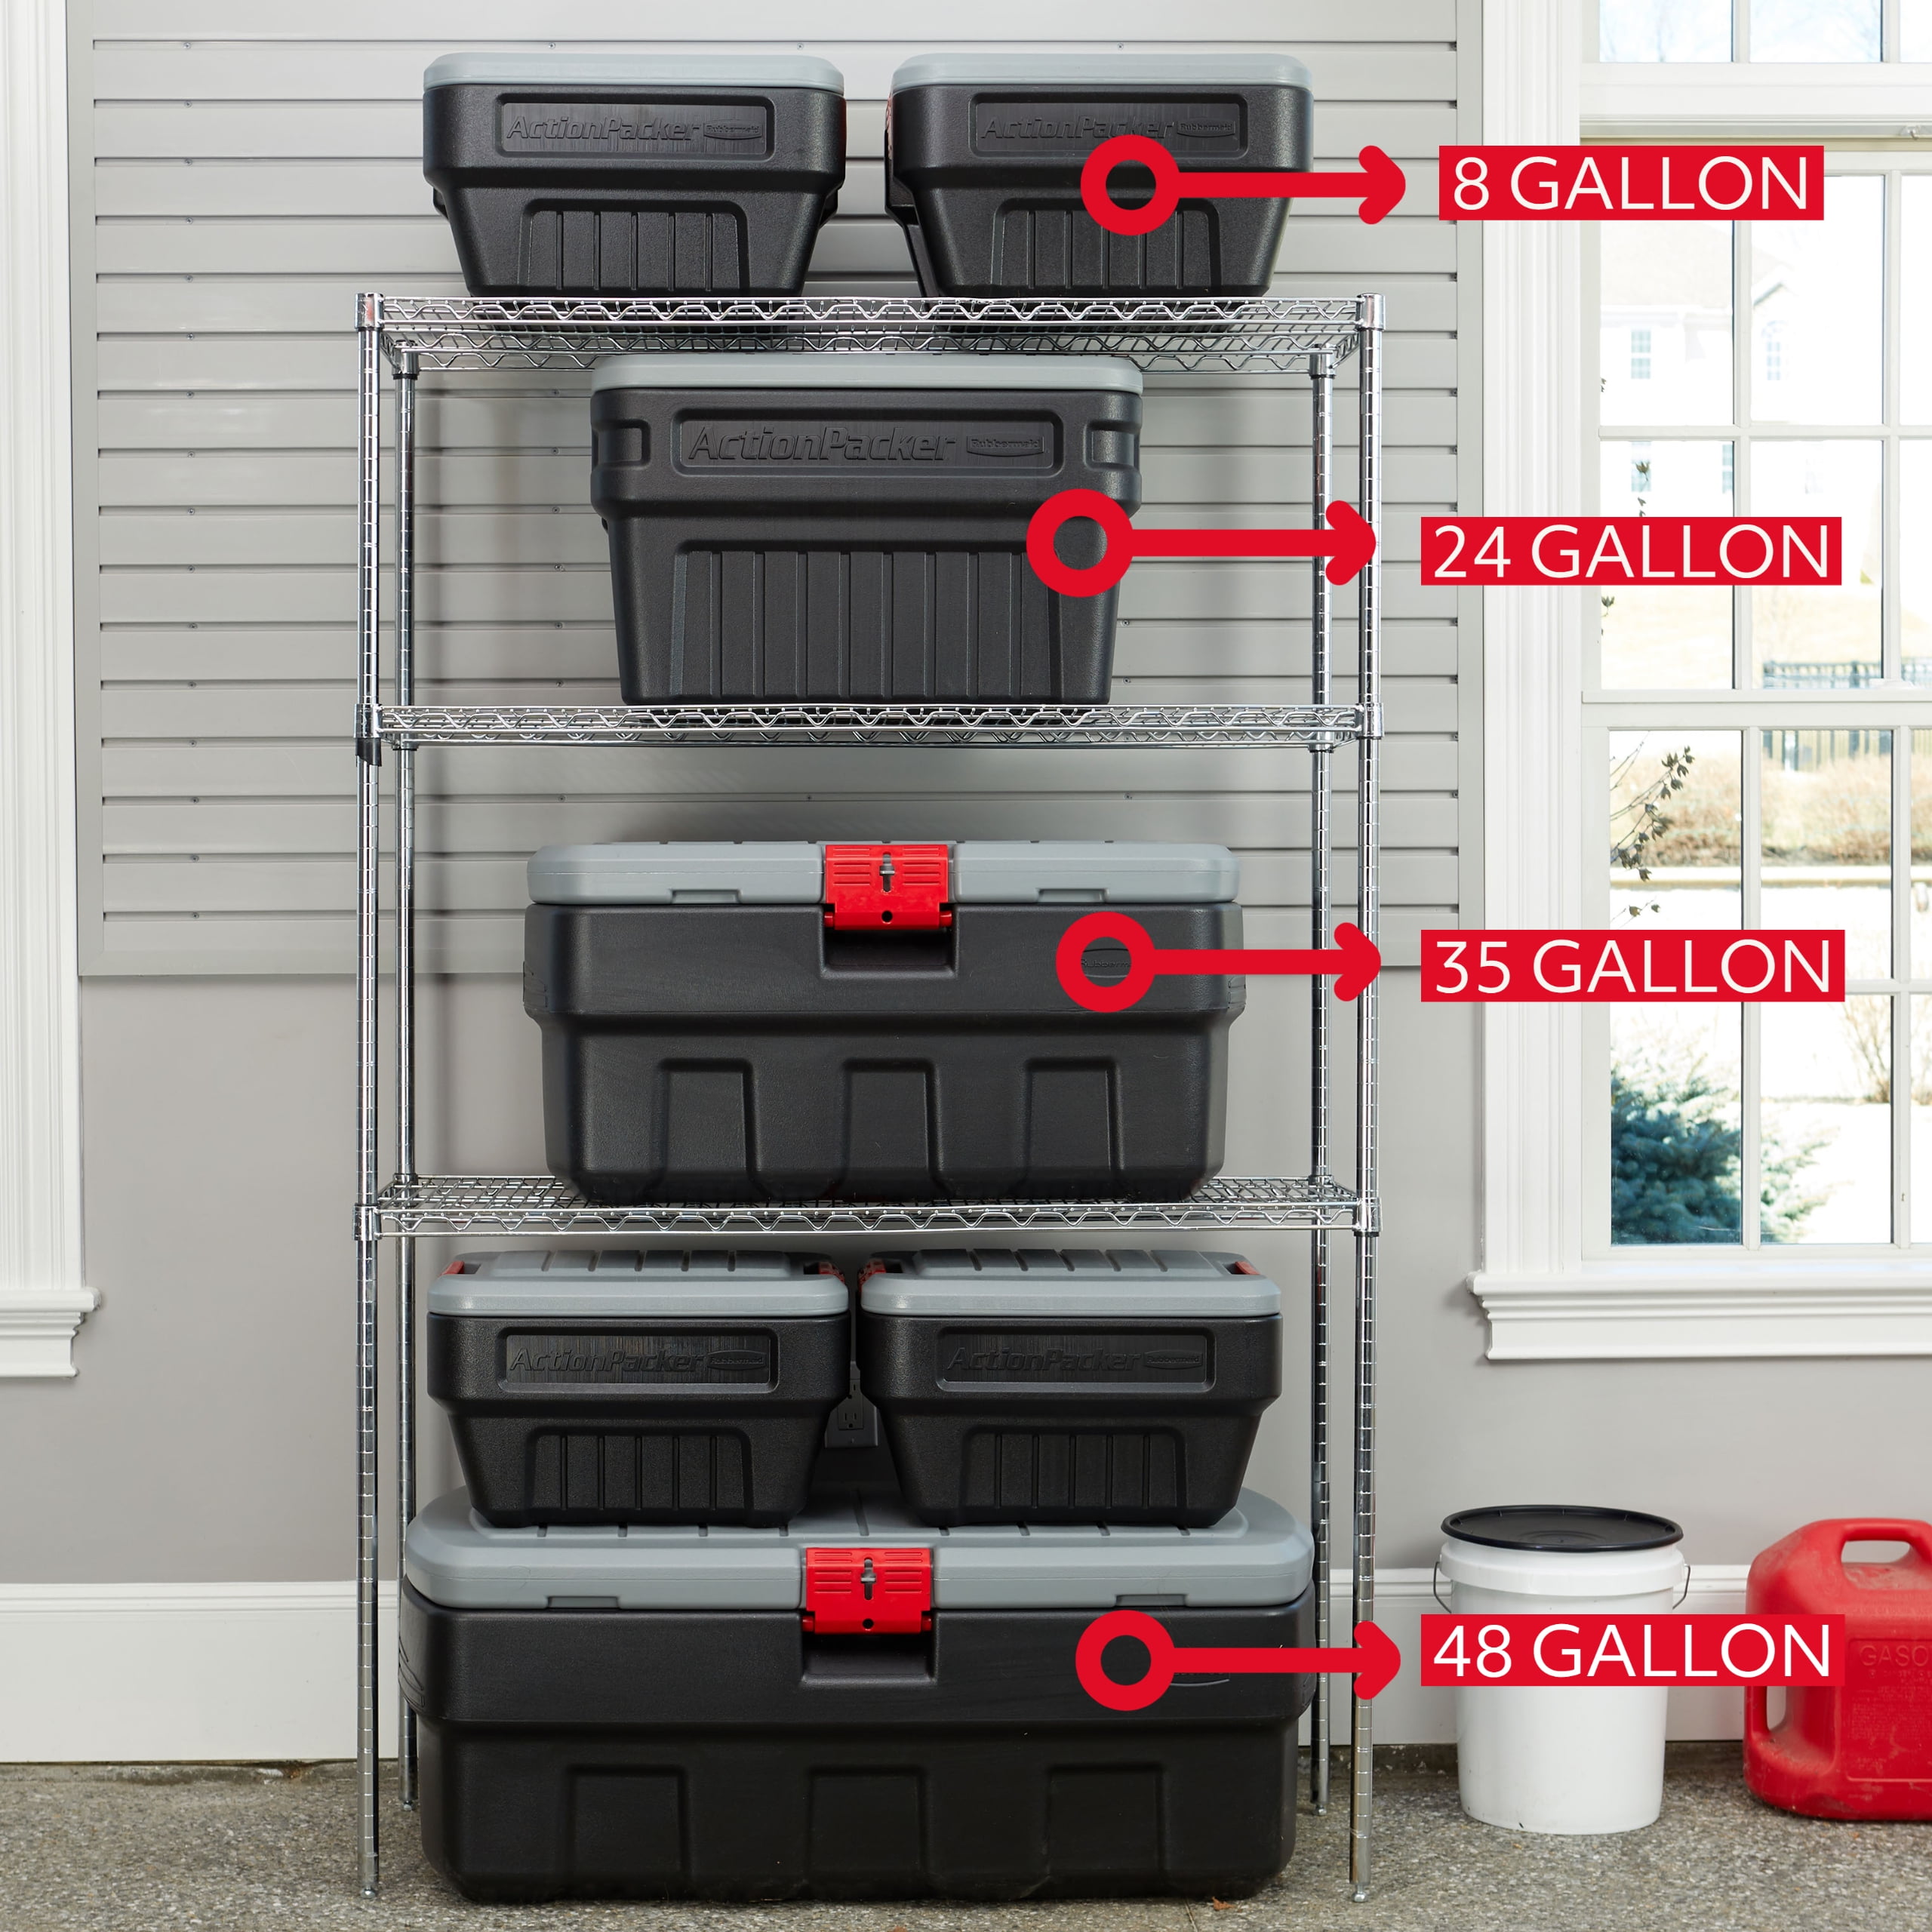 United Solutions Rubbermaid ActionPacker Storage Tote 